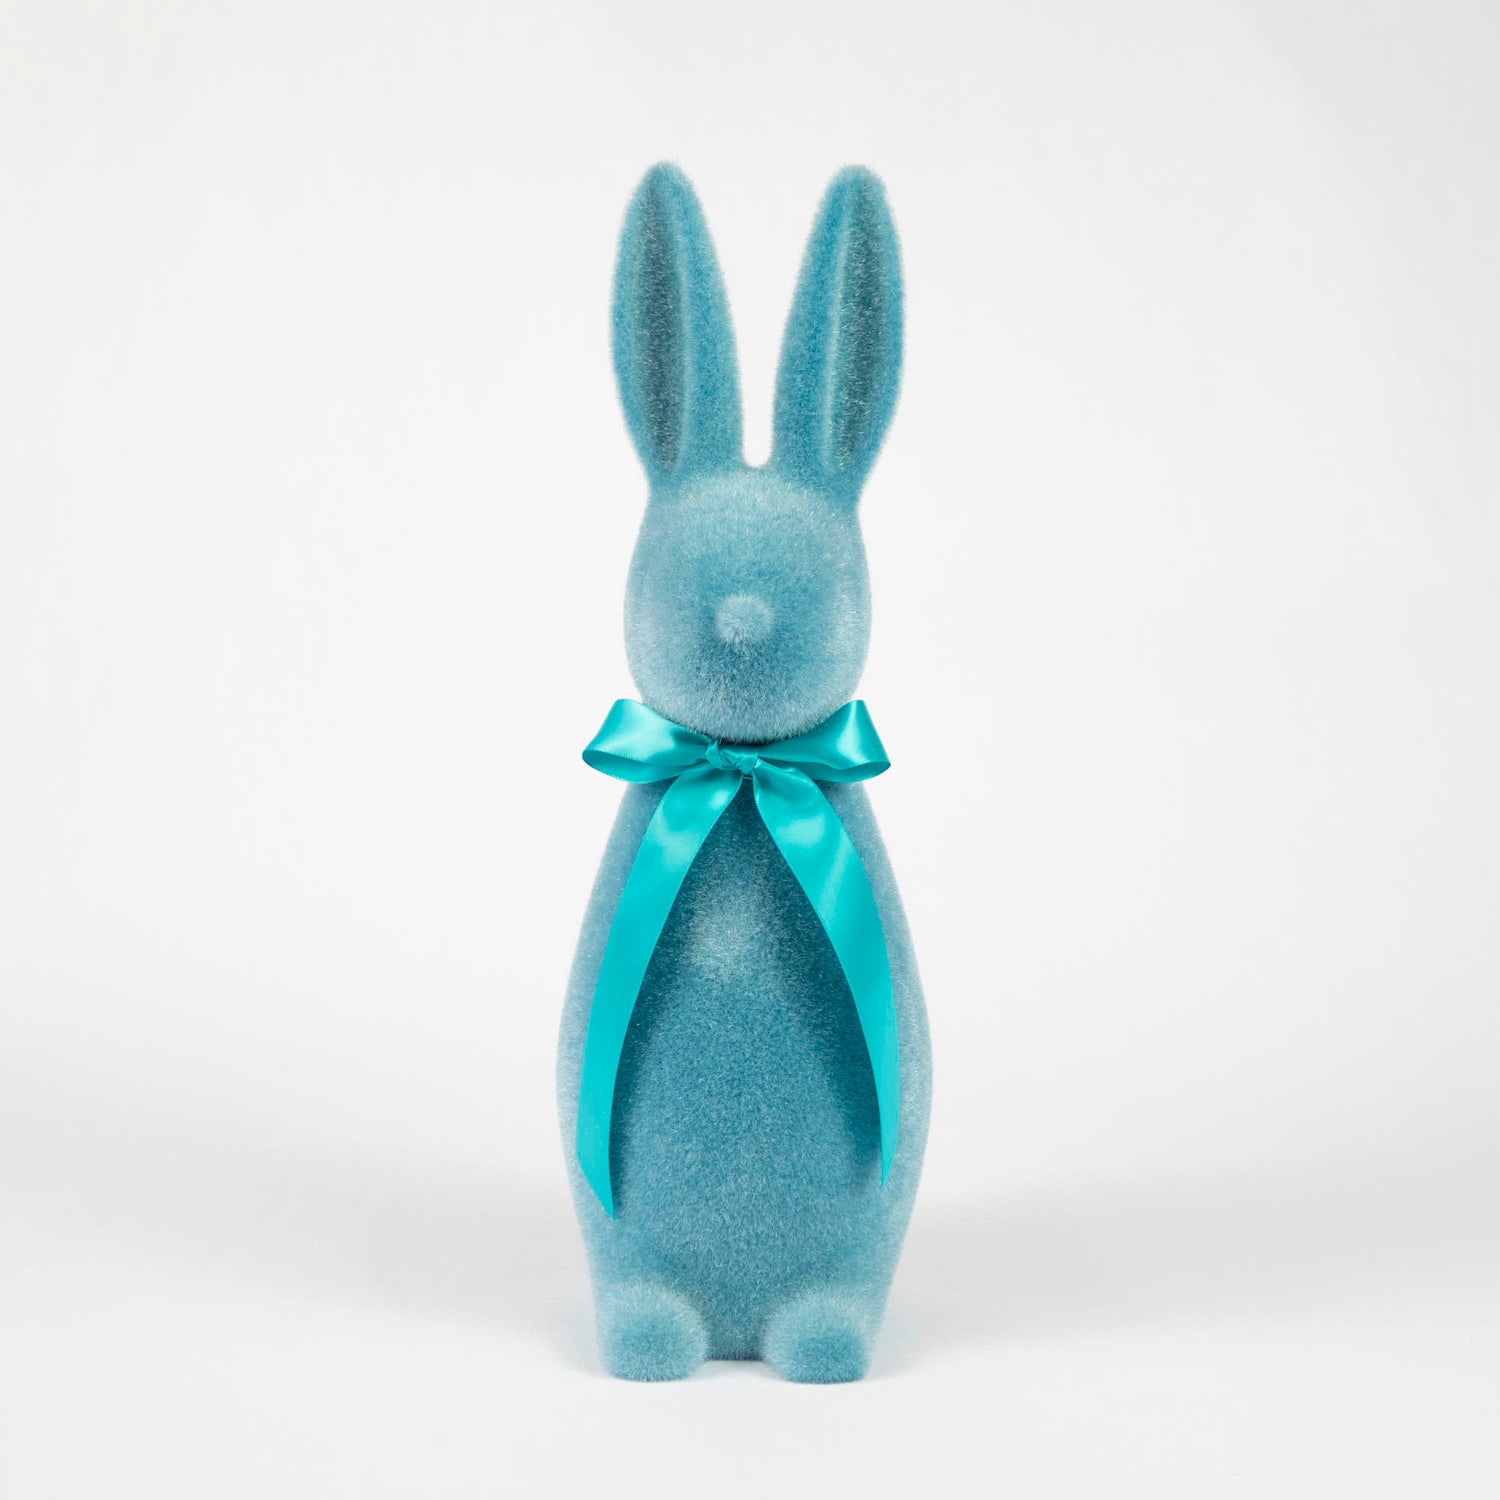 A Glitterville Medium Flocked Button Nose Bunny with soft pastel coloring, wearing a blue bow, perfect for Easter celebration.